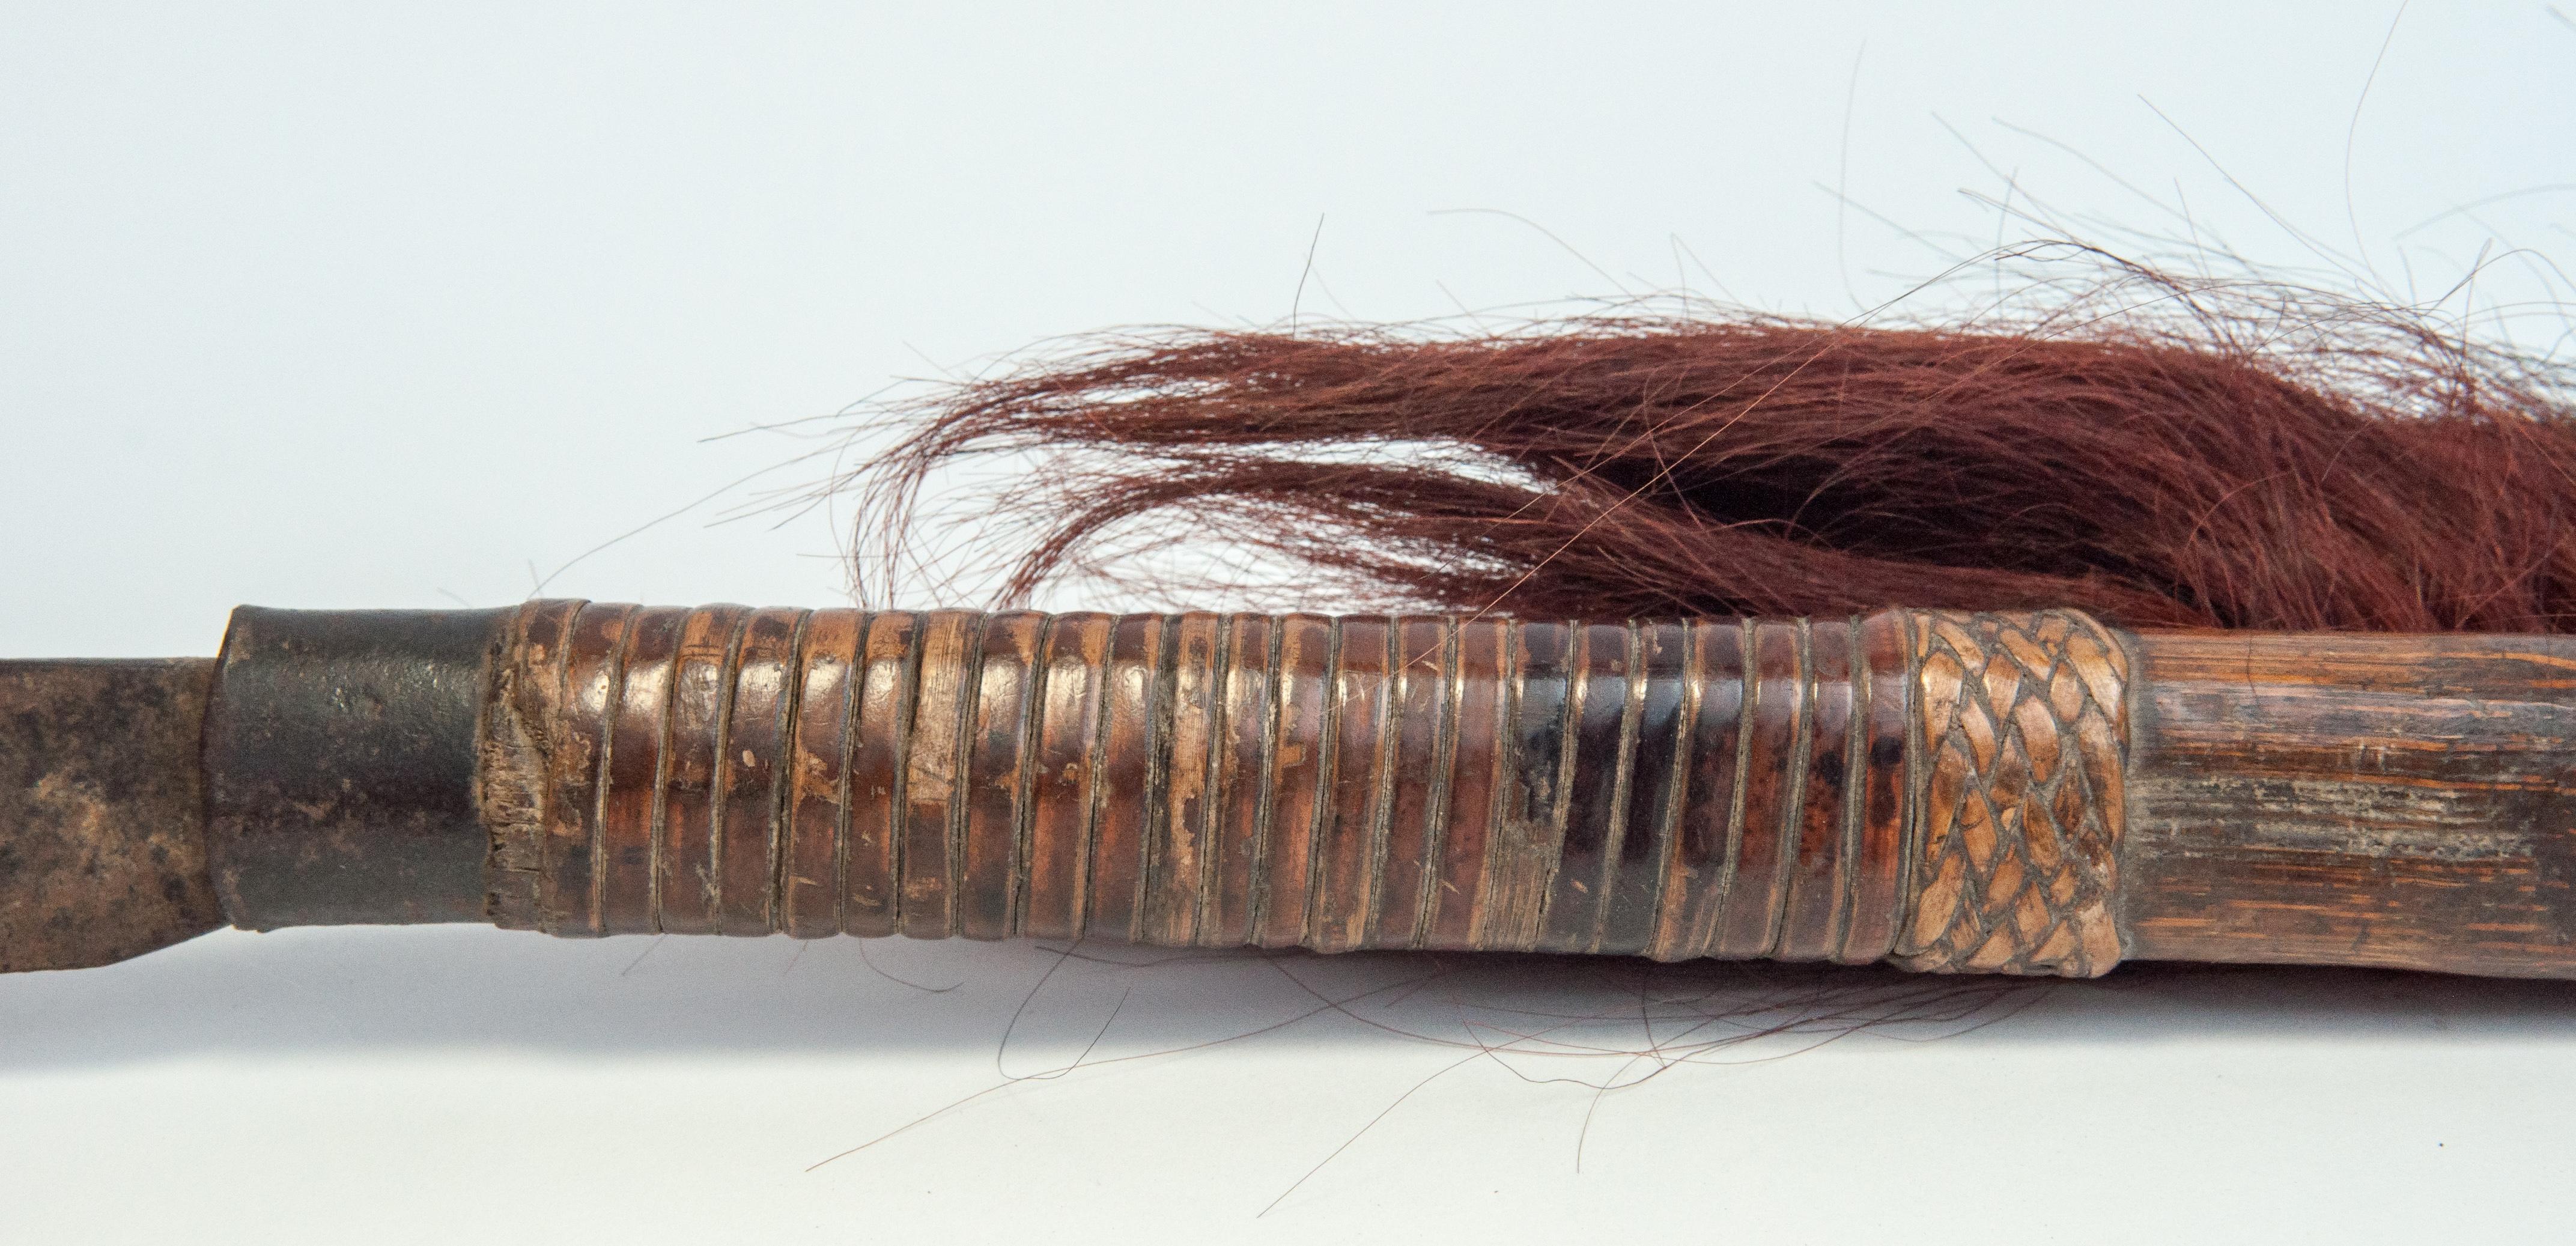 Indian Tribal Ceremonial Knife with Goat Hair Decoration, Nagaland, Mid-20th Century